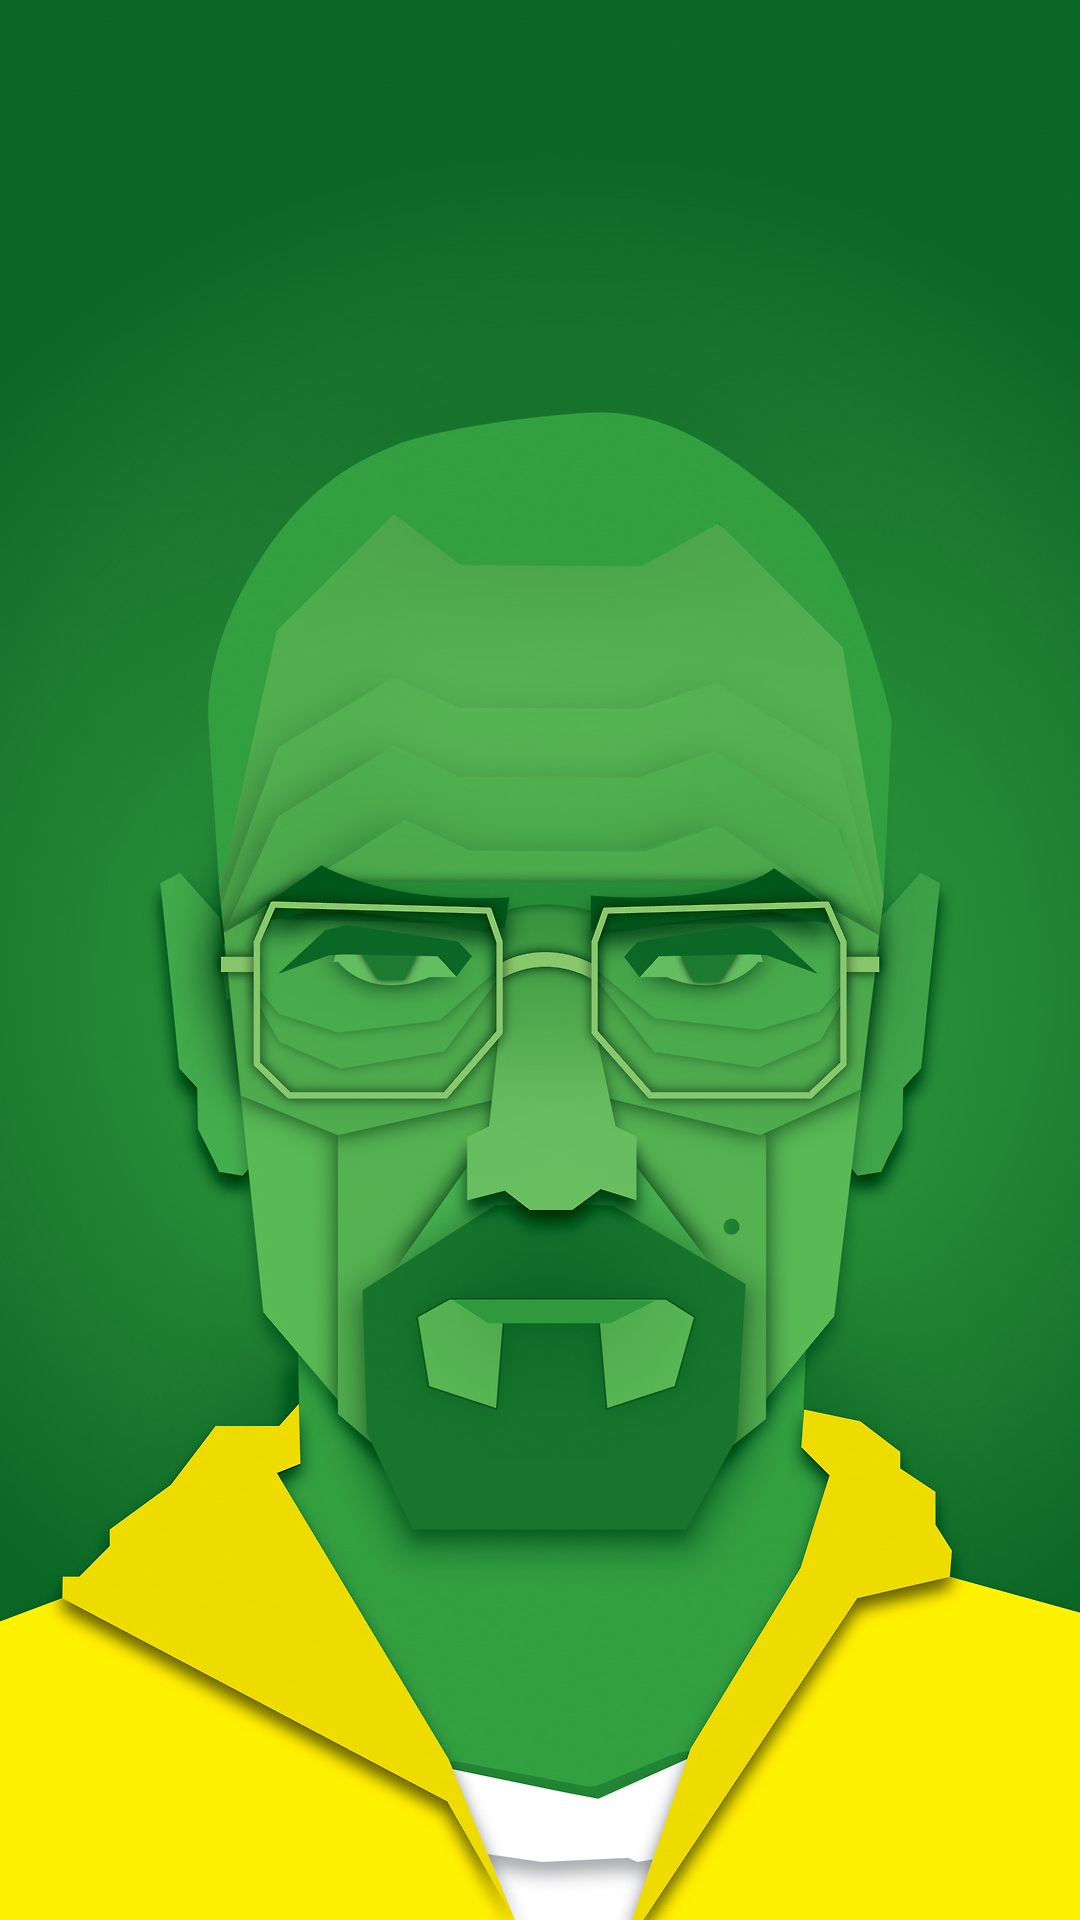 Breaking bad walter white cartoon wallpaper for iphone pro max x